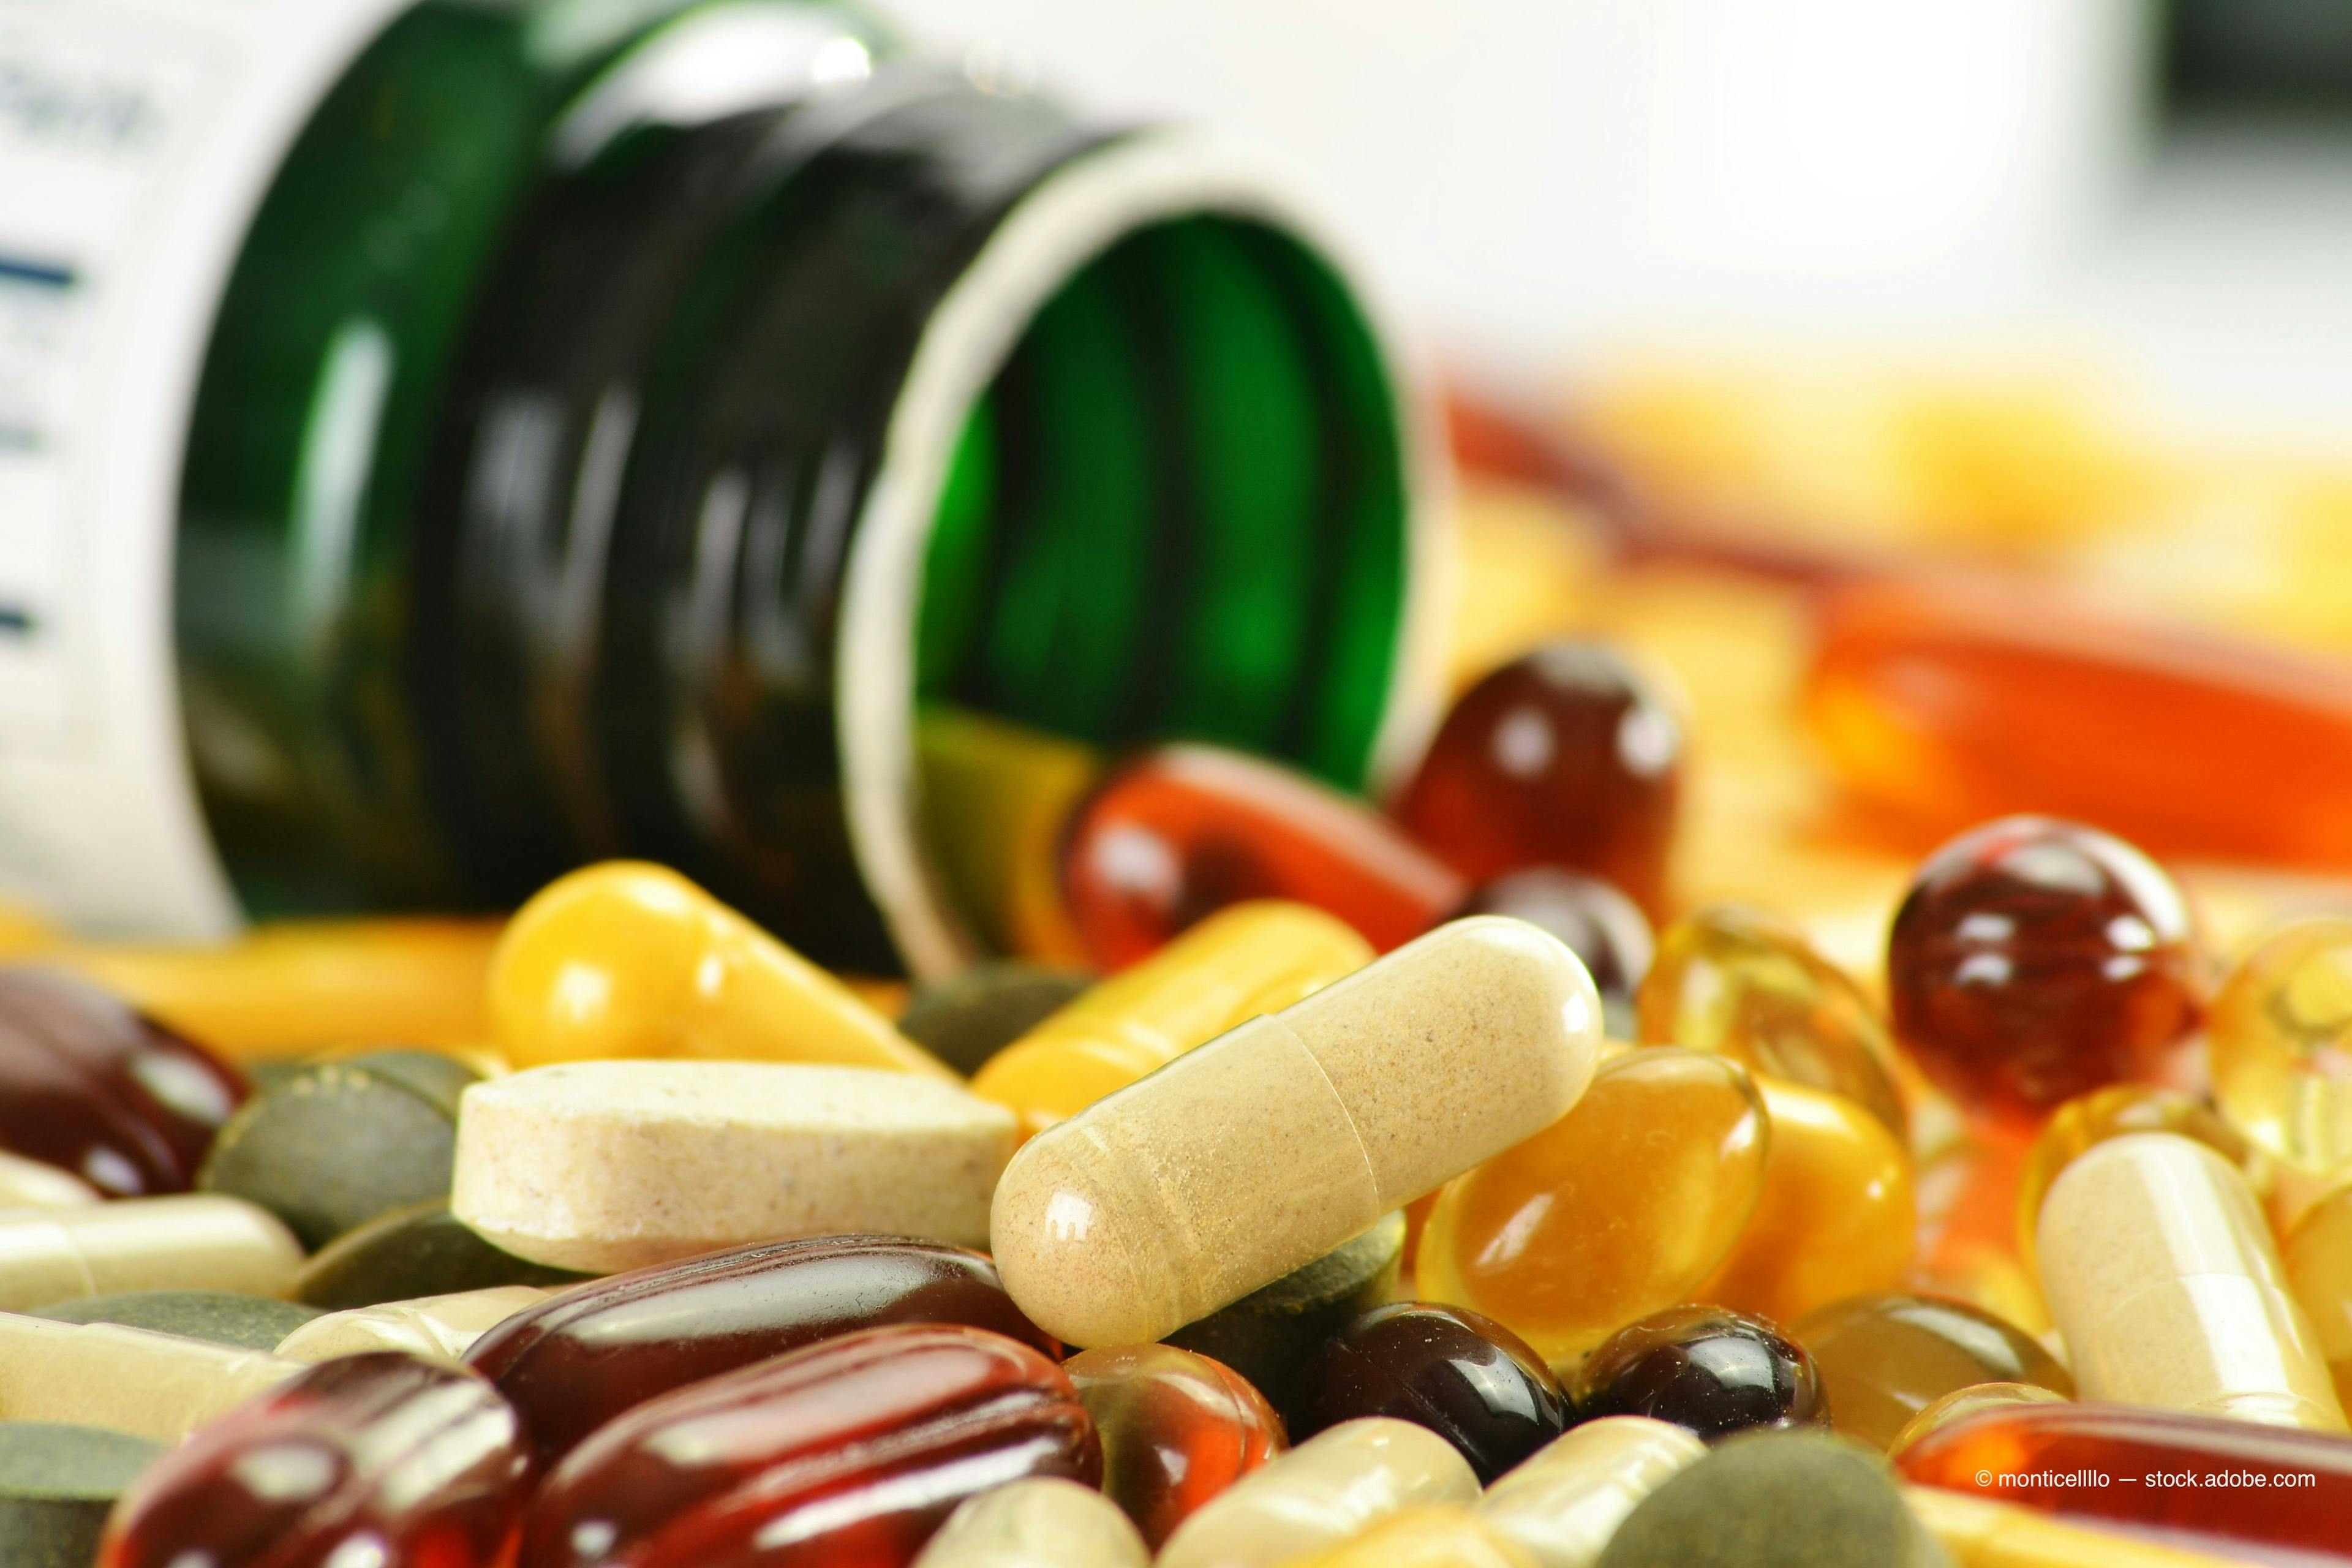 Dietary supplement can improve measurable visual outcomes